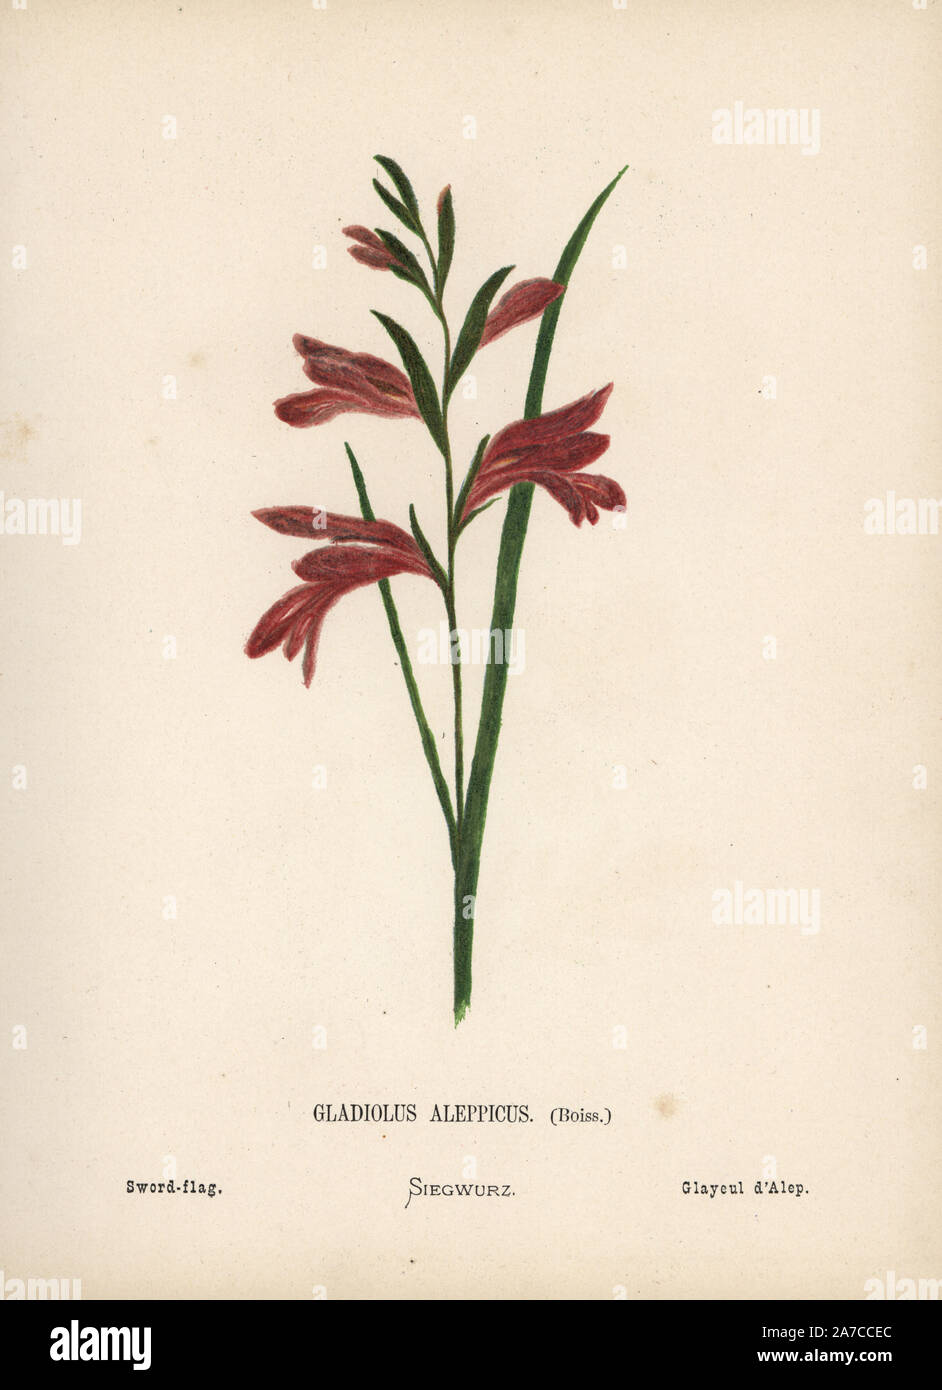 Sword flag, Gladiolus atroviolaceus. Chromolithograph of a botanical illustration by Hannah Zeller from her own Wild Flowers of the Holy Land,' James Nisbet, London, 1876. Hannah Zeller (1838-1922) was a Swiss missionary who botanized near Nazareth for many years. Stock Photo